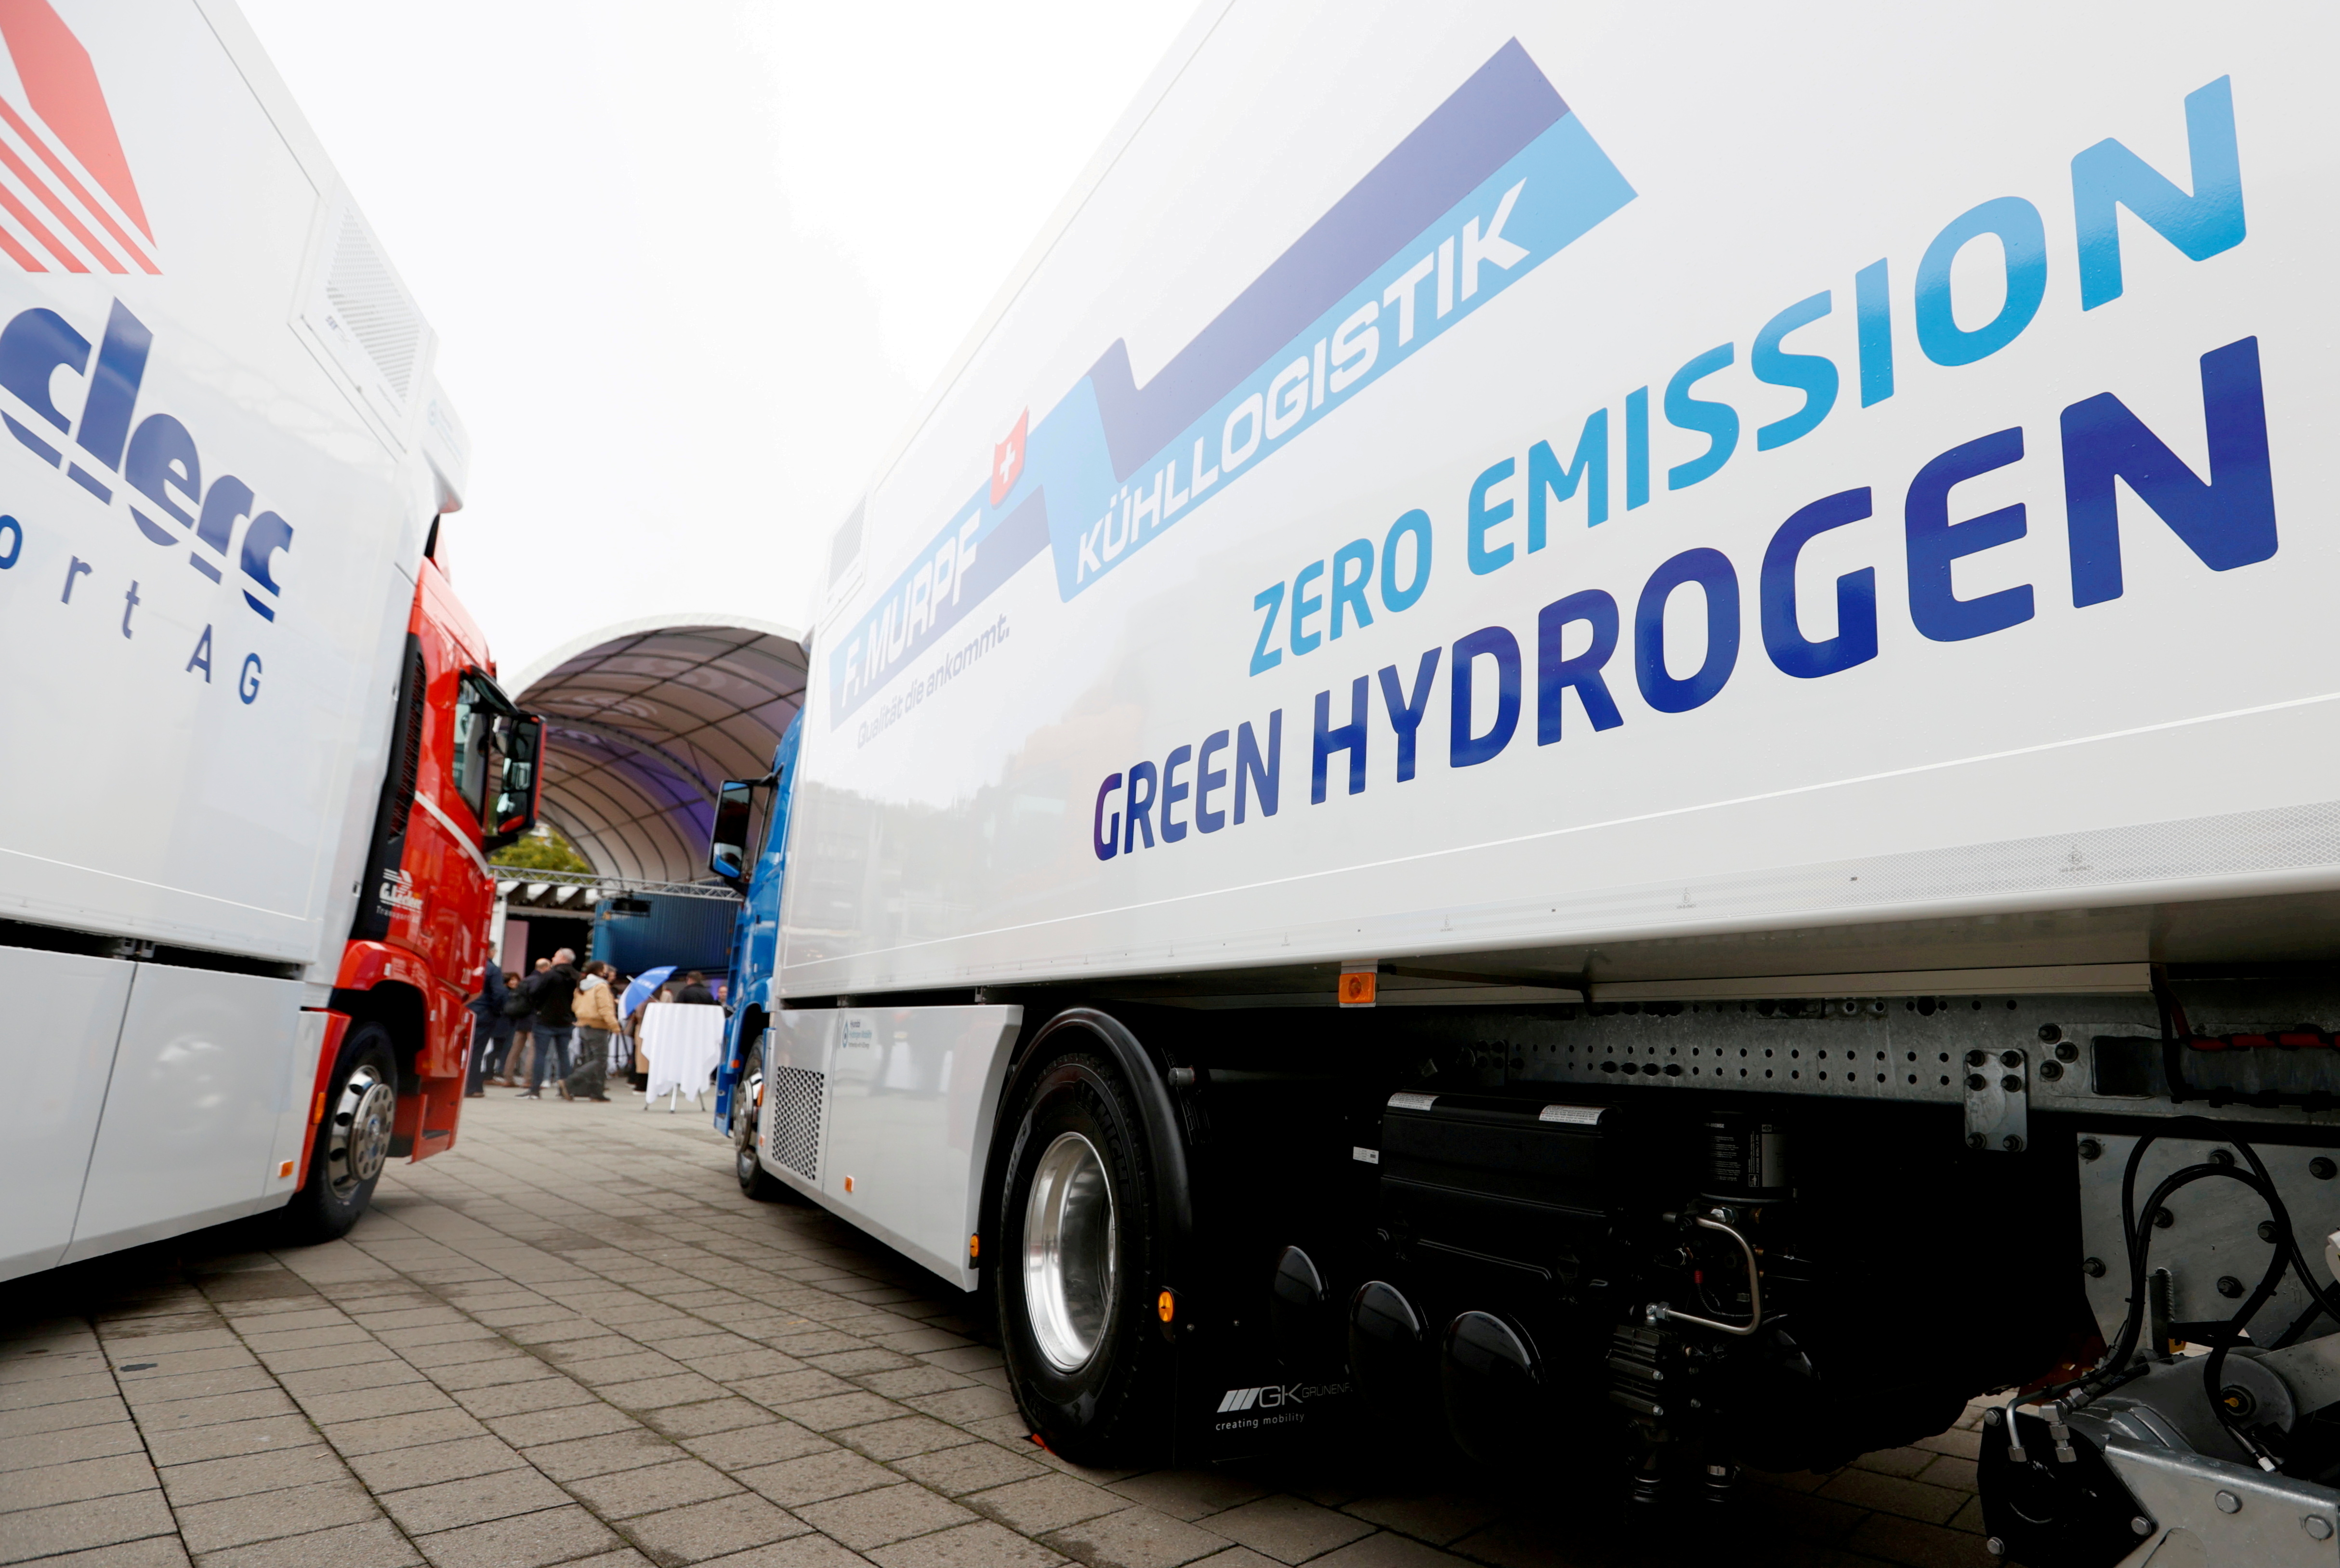 A new hydrogen fuel cell truck made by Hyundai is pictured at the Verkehrshaus Luzern (Swiss Museum of Transport) in Luzern, Switzerland October 7, 2020. REUTERS/Denis Balibouse